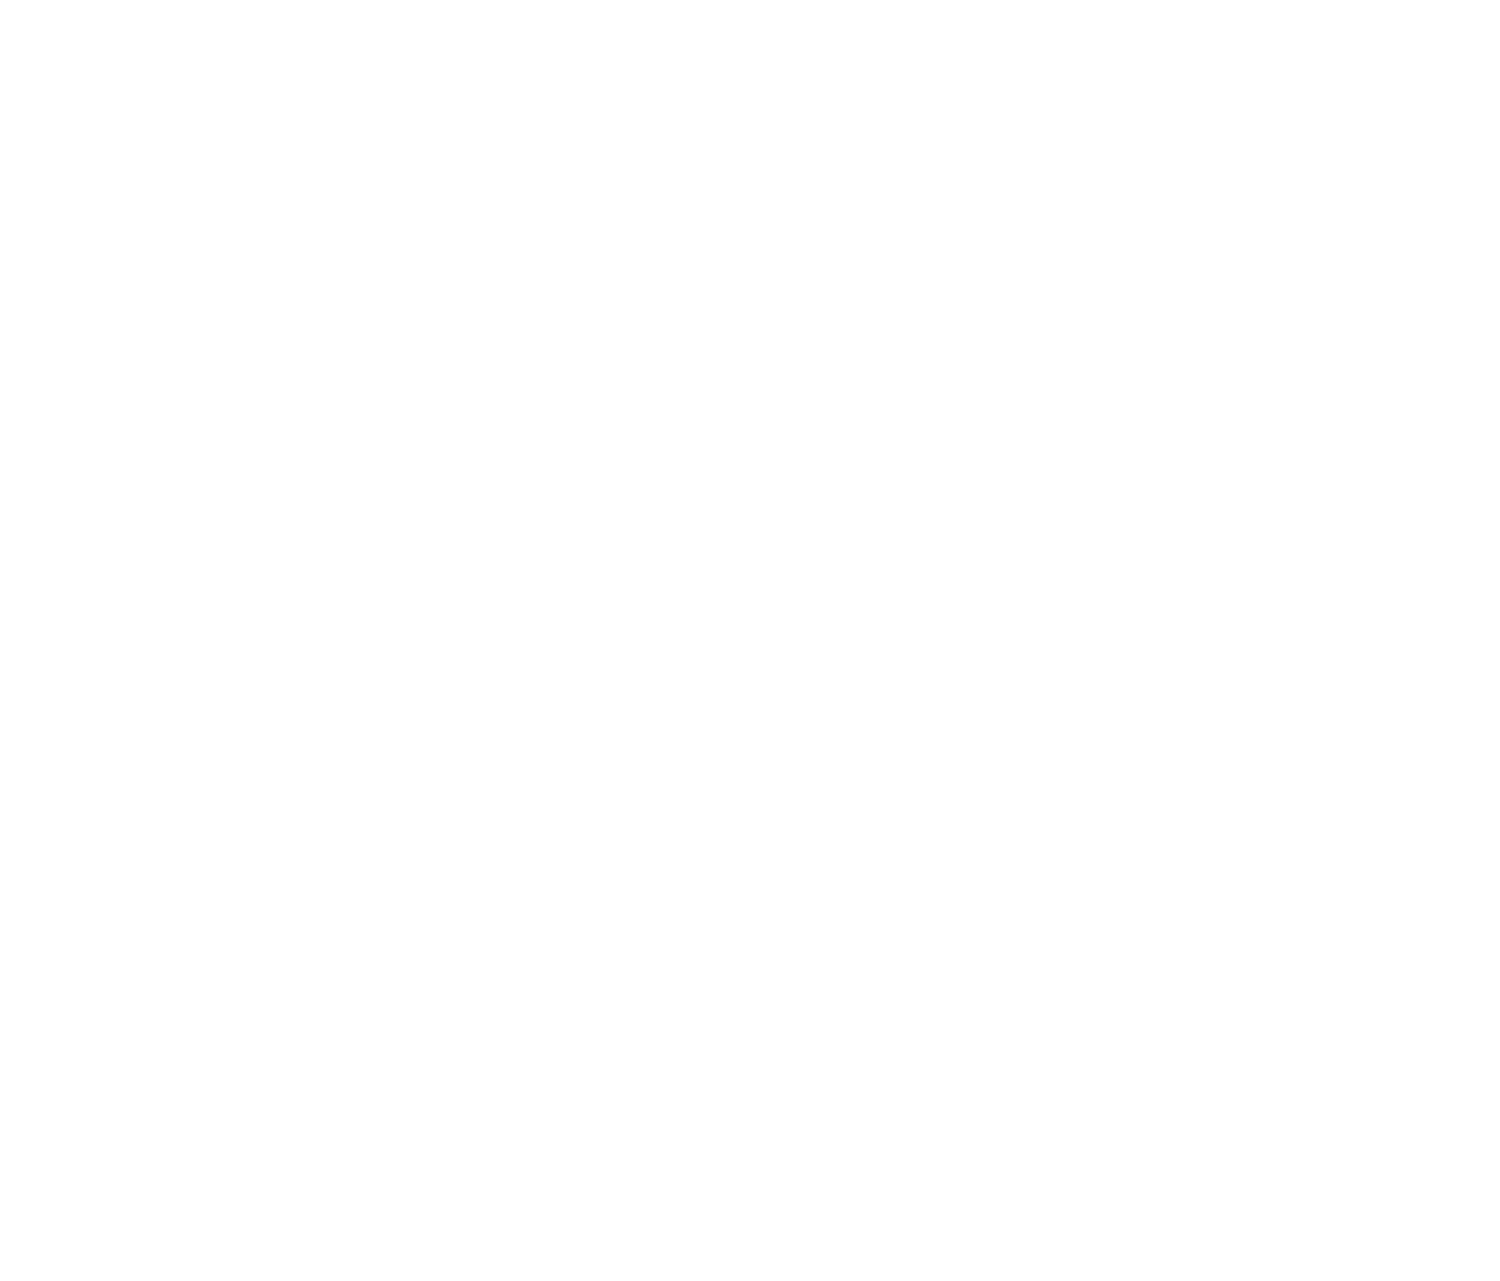 World Wide Part Supply Corp.